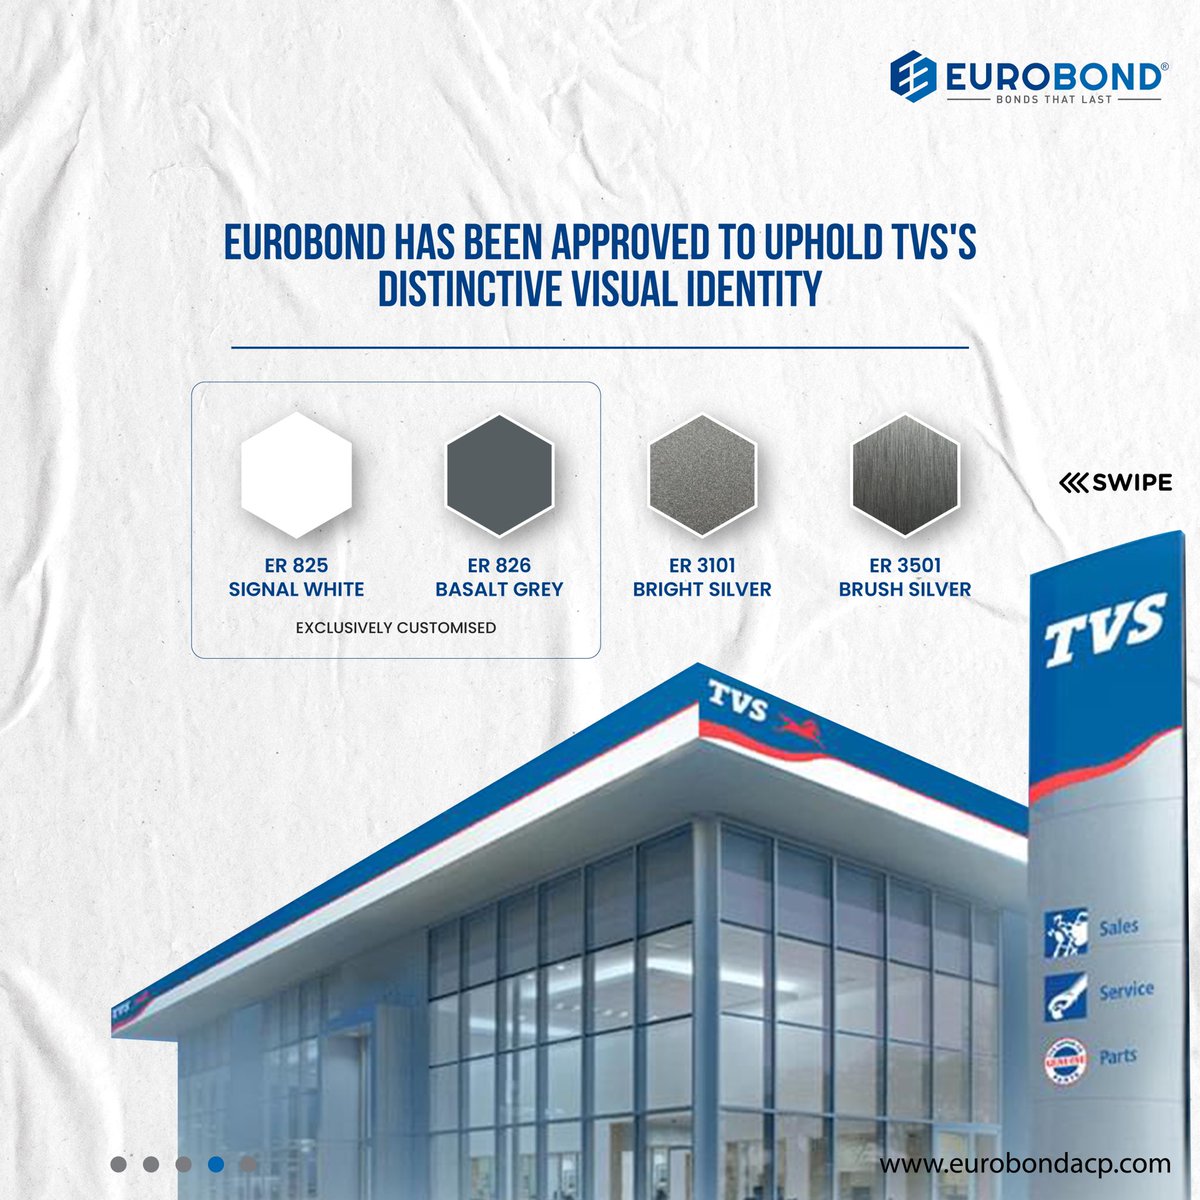 We are delighted to announce Eurobond as approved partner of TVS Motors, the world's 5th largest two-wheeler manufacturer, renowned for its distinctive visual identity and engineering excellence.

#Eurobond #EurobondIndia #EurobondACP #TVSmotors #aluminiumcompositepanels #FRACP